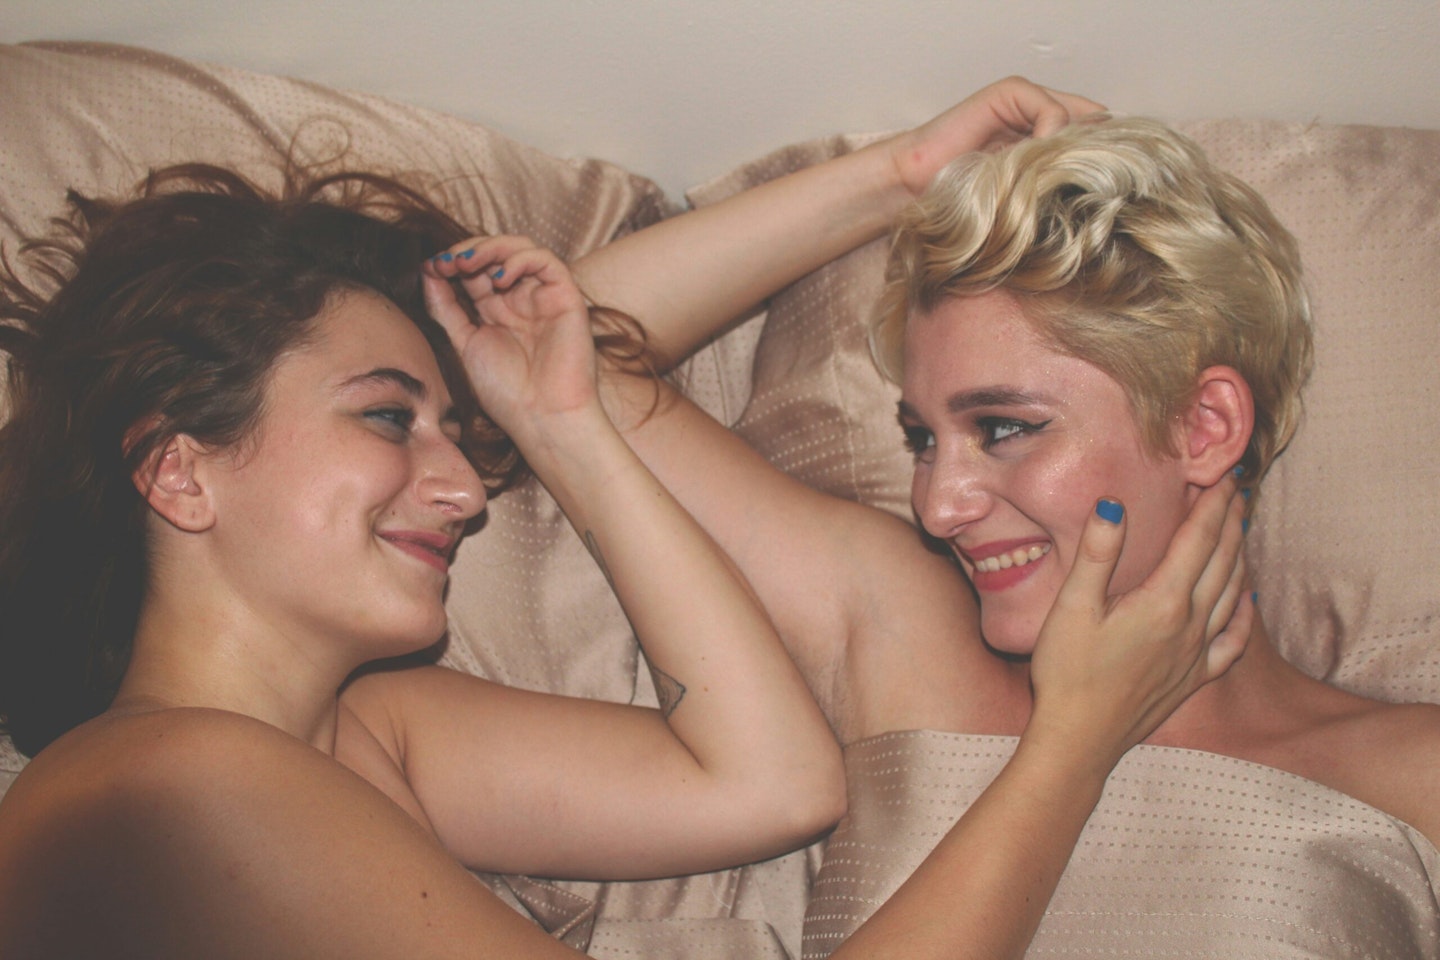 Women in bed together